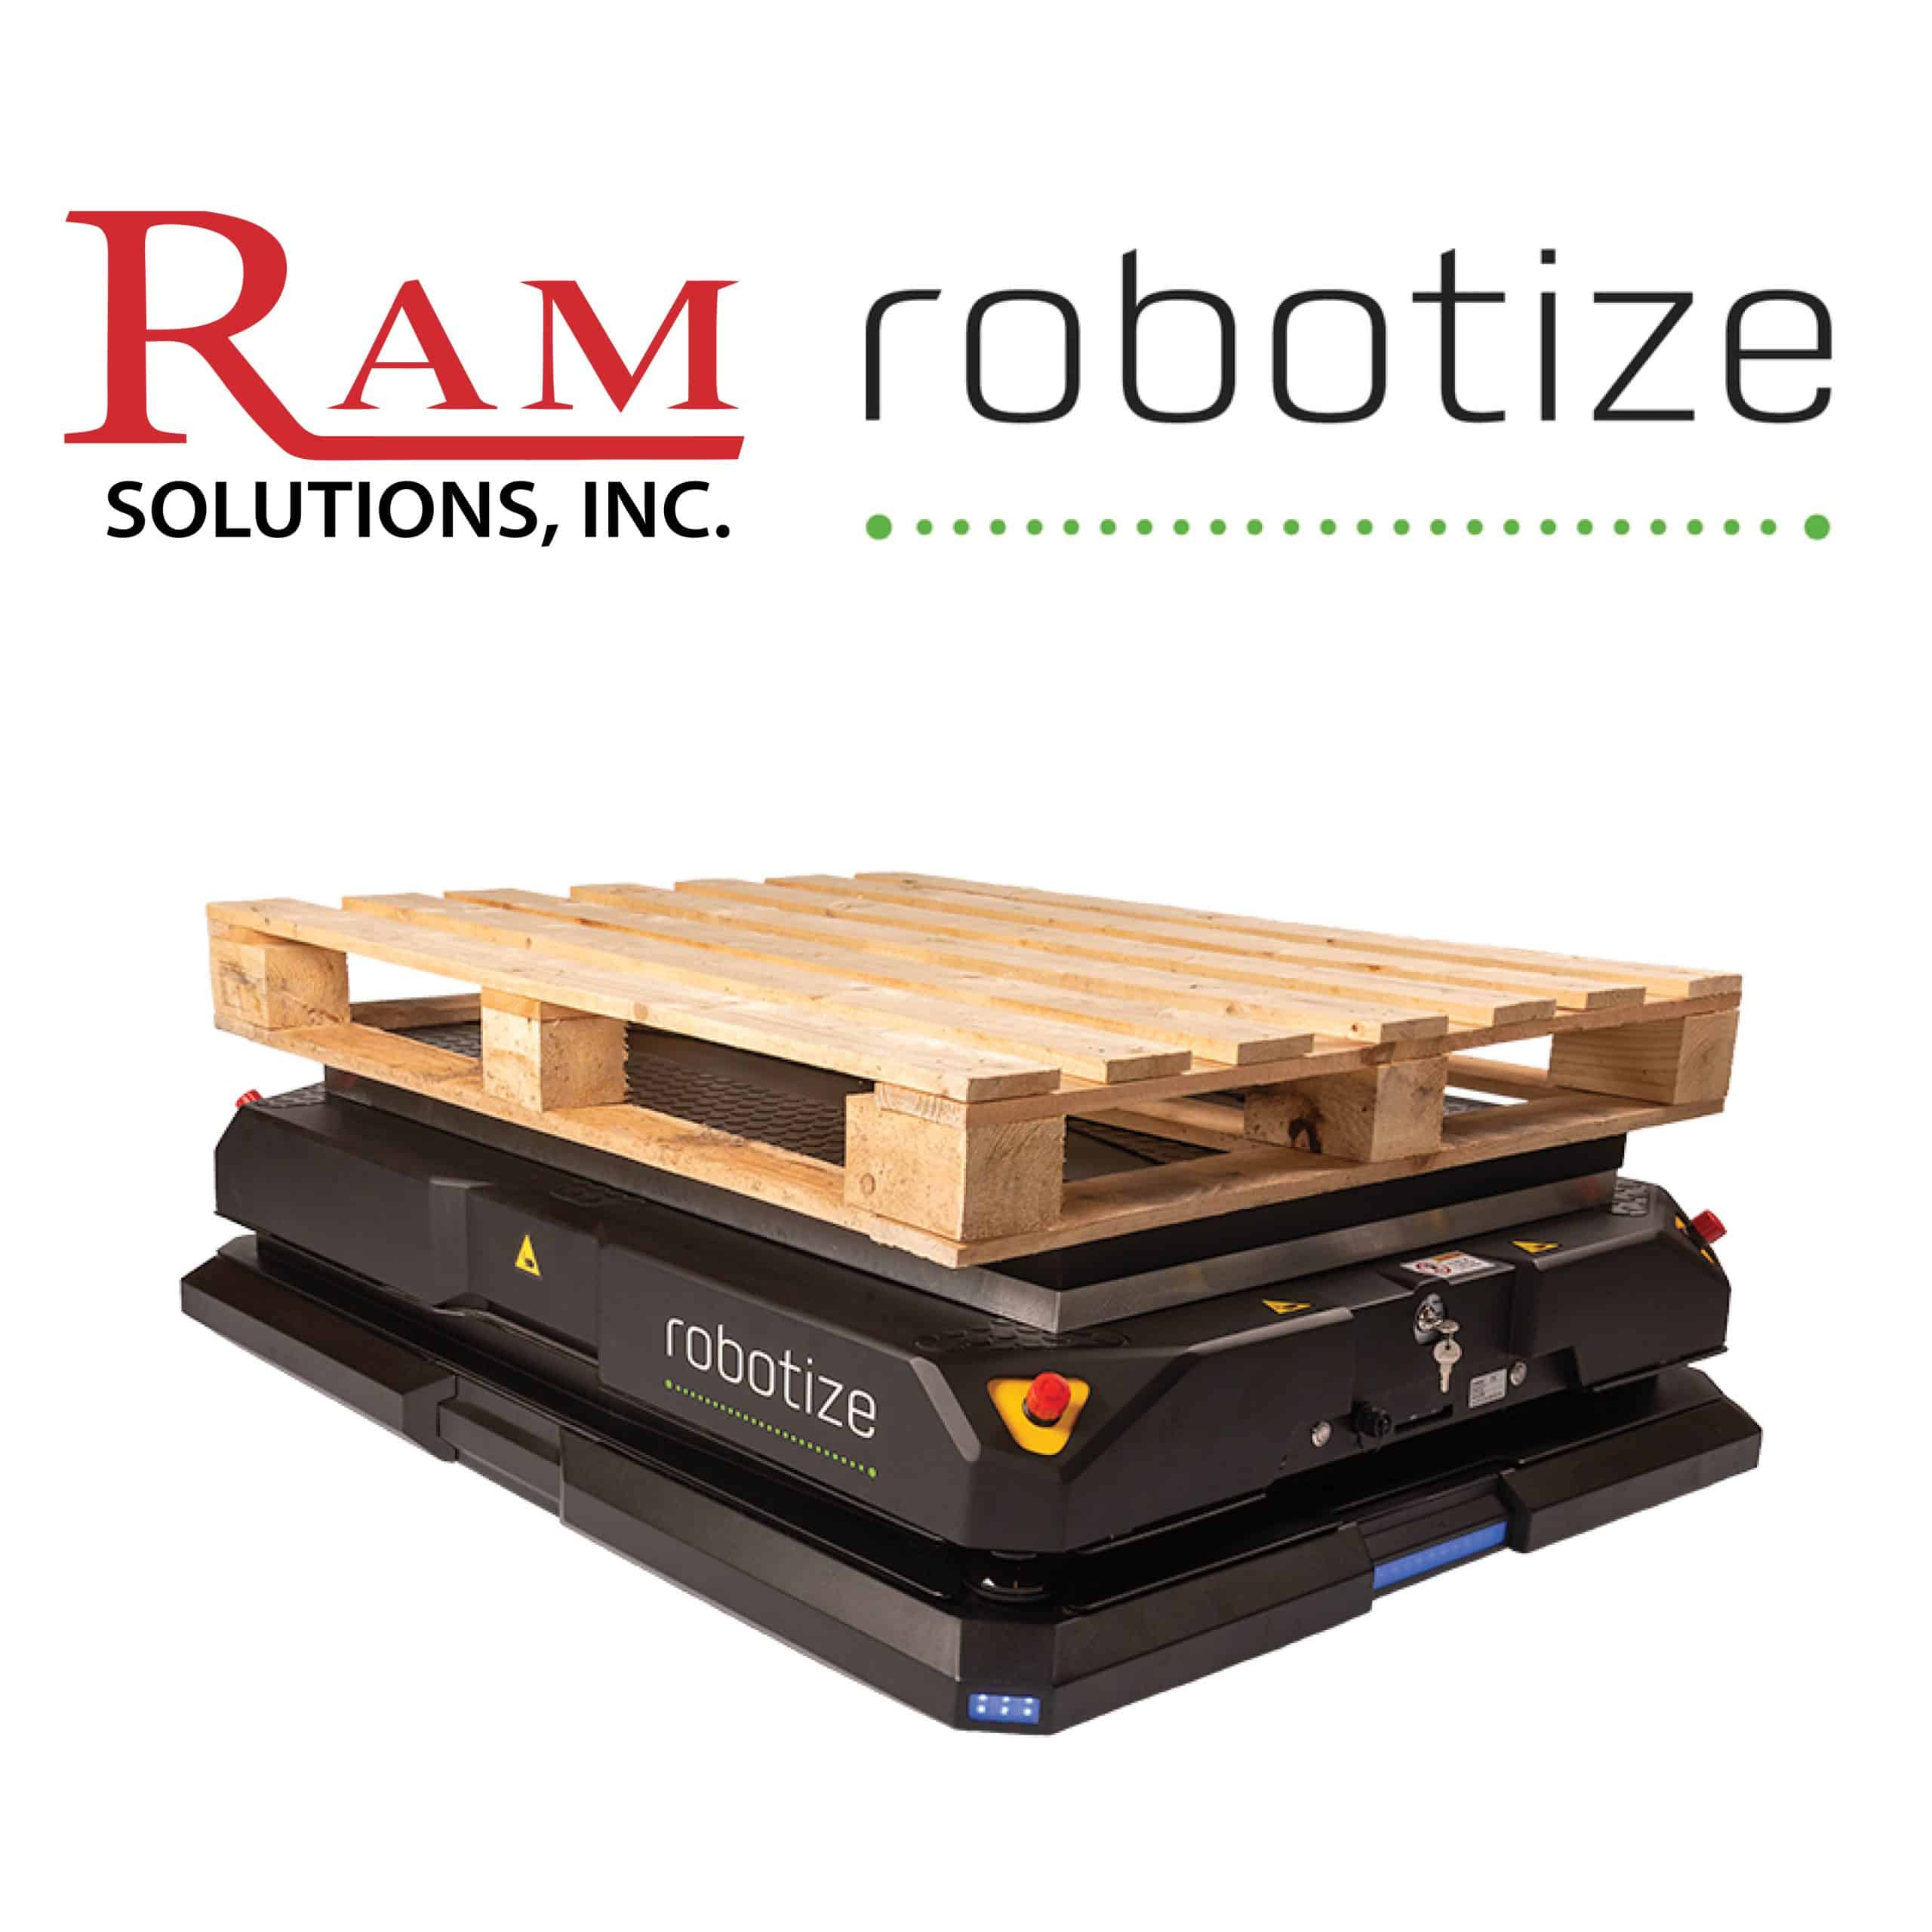 ram partners with robotize